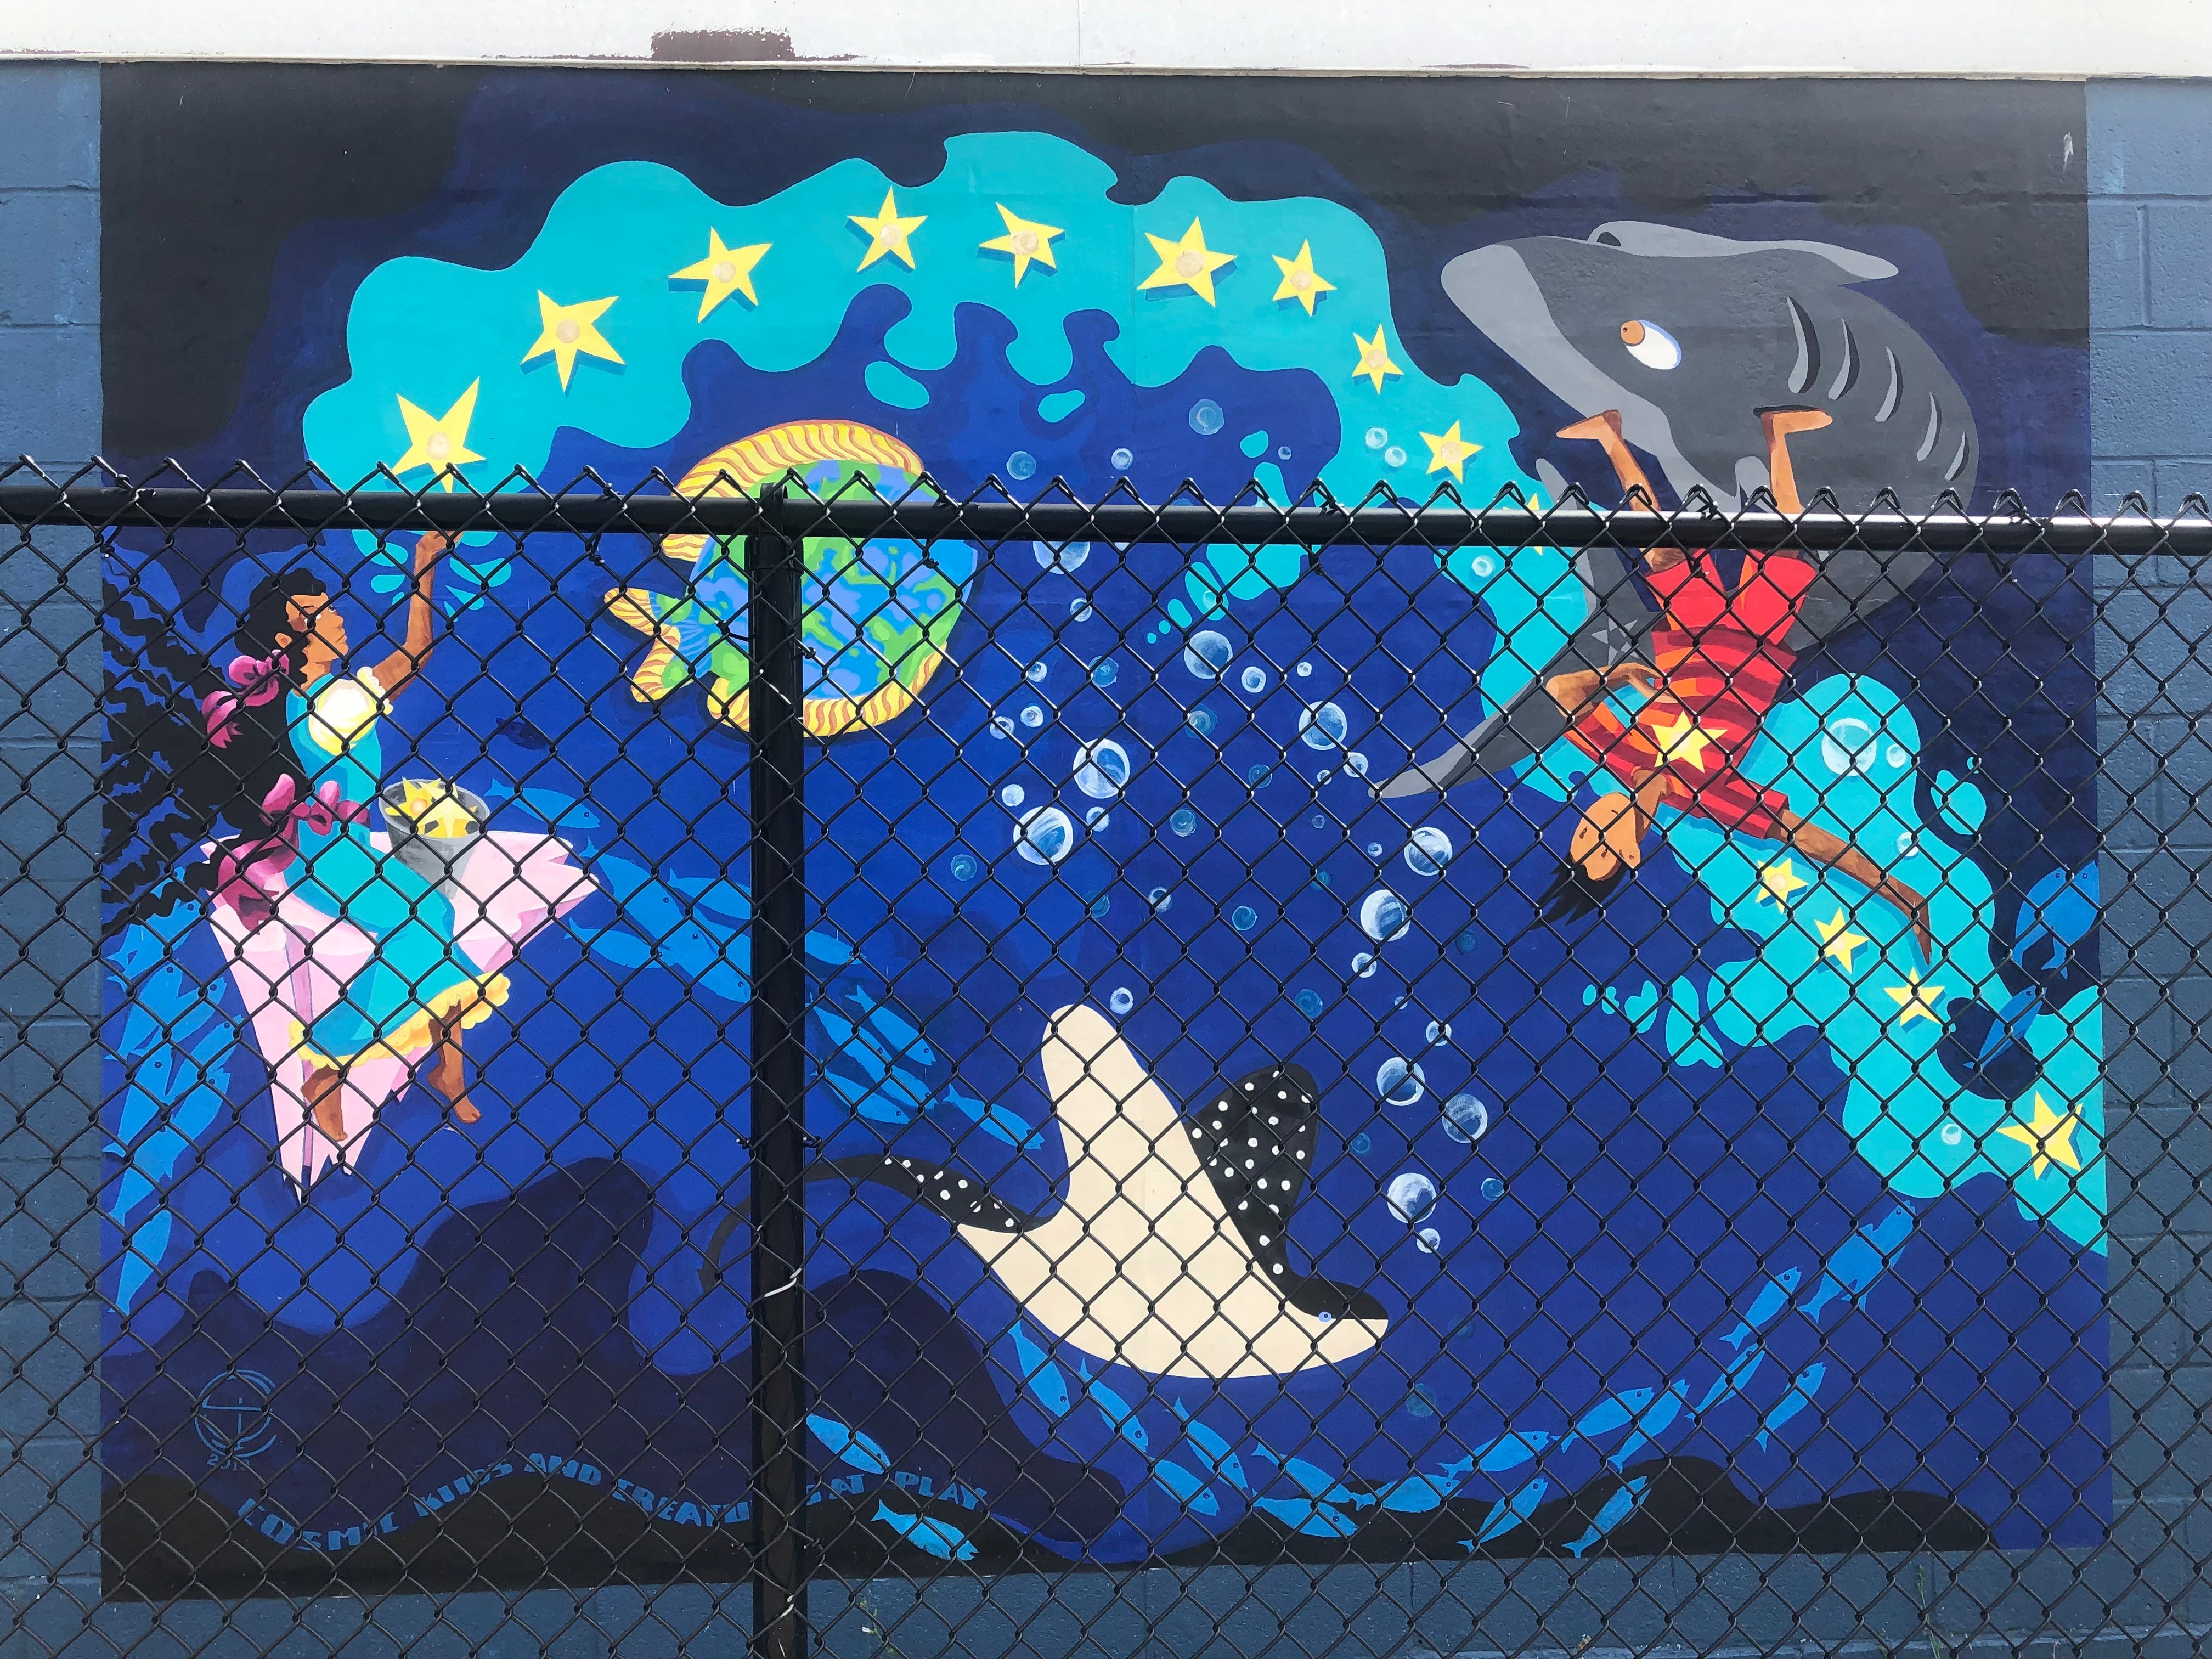 An underwater scene painted by Susan Champeny in 2019 in Floral Ave. Park at 200 Floral Ave. in Johnson City depicts a school of fish swimming across it.